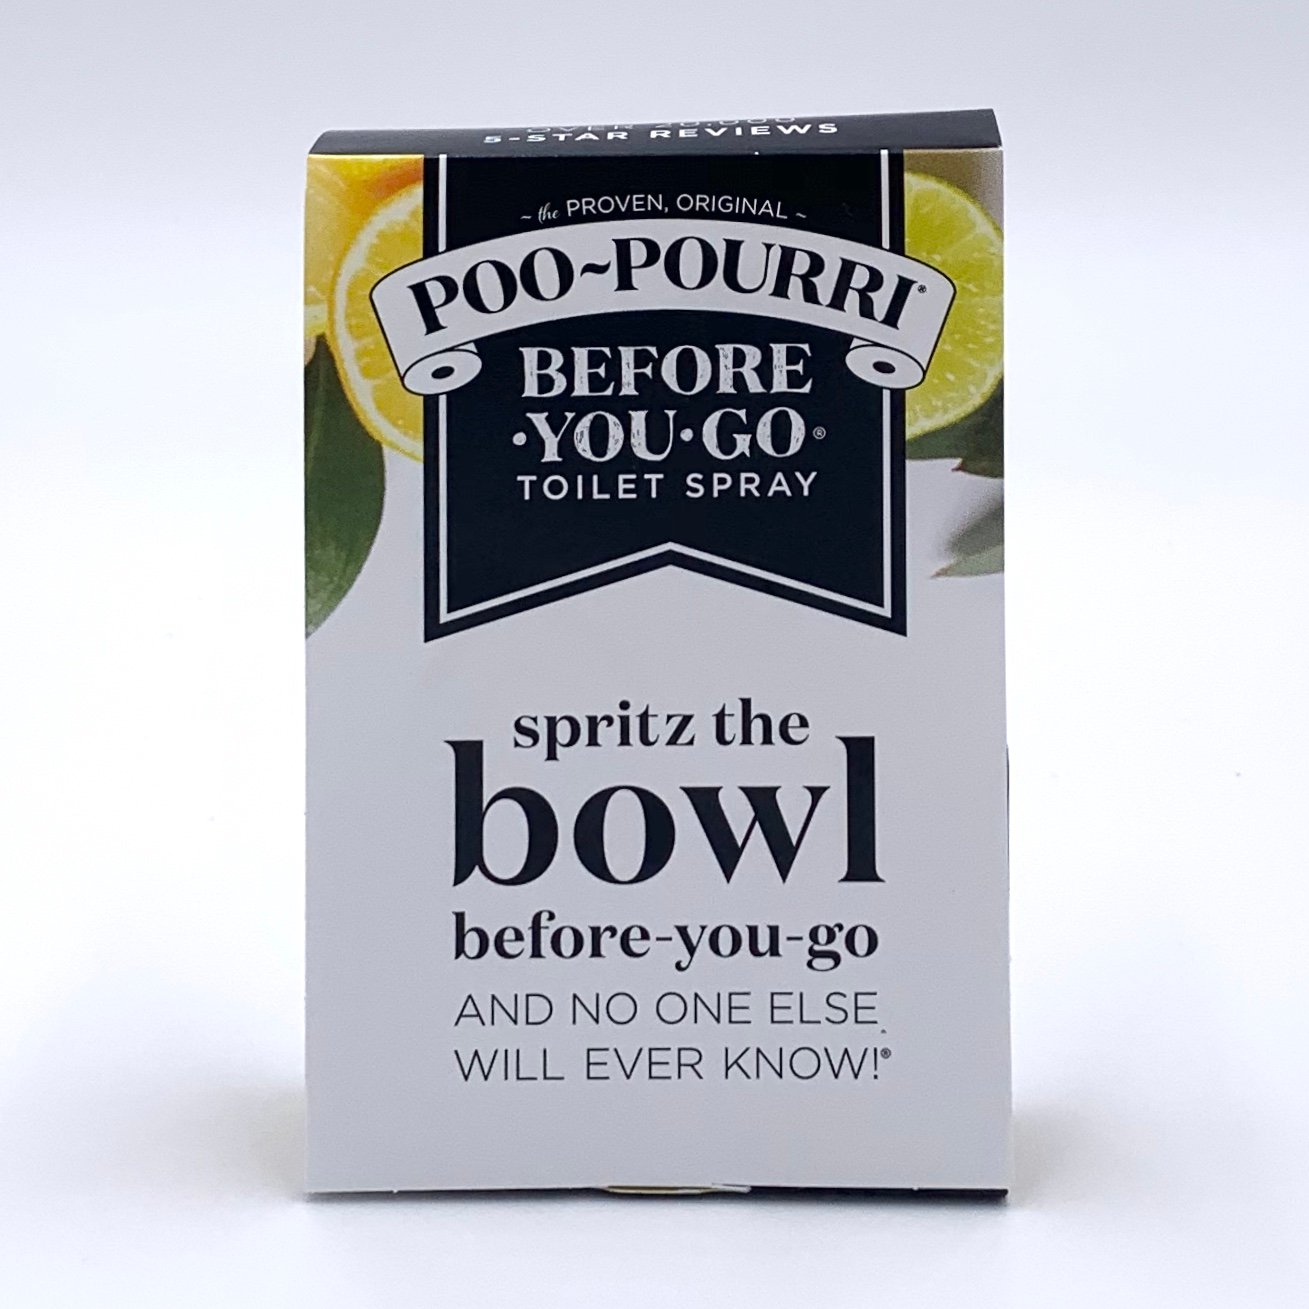 Poo-Pourri Before-You-Go Toilet Spray Packaging for Cocotique July 2020